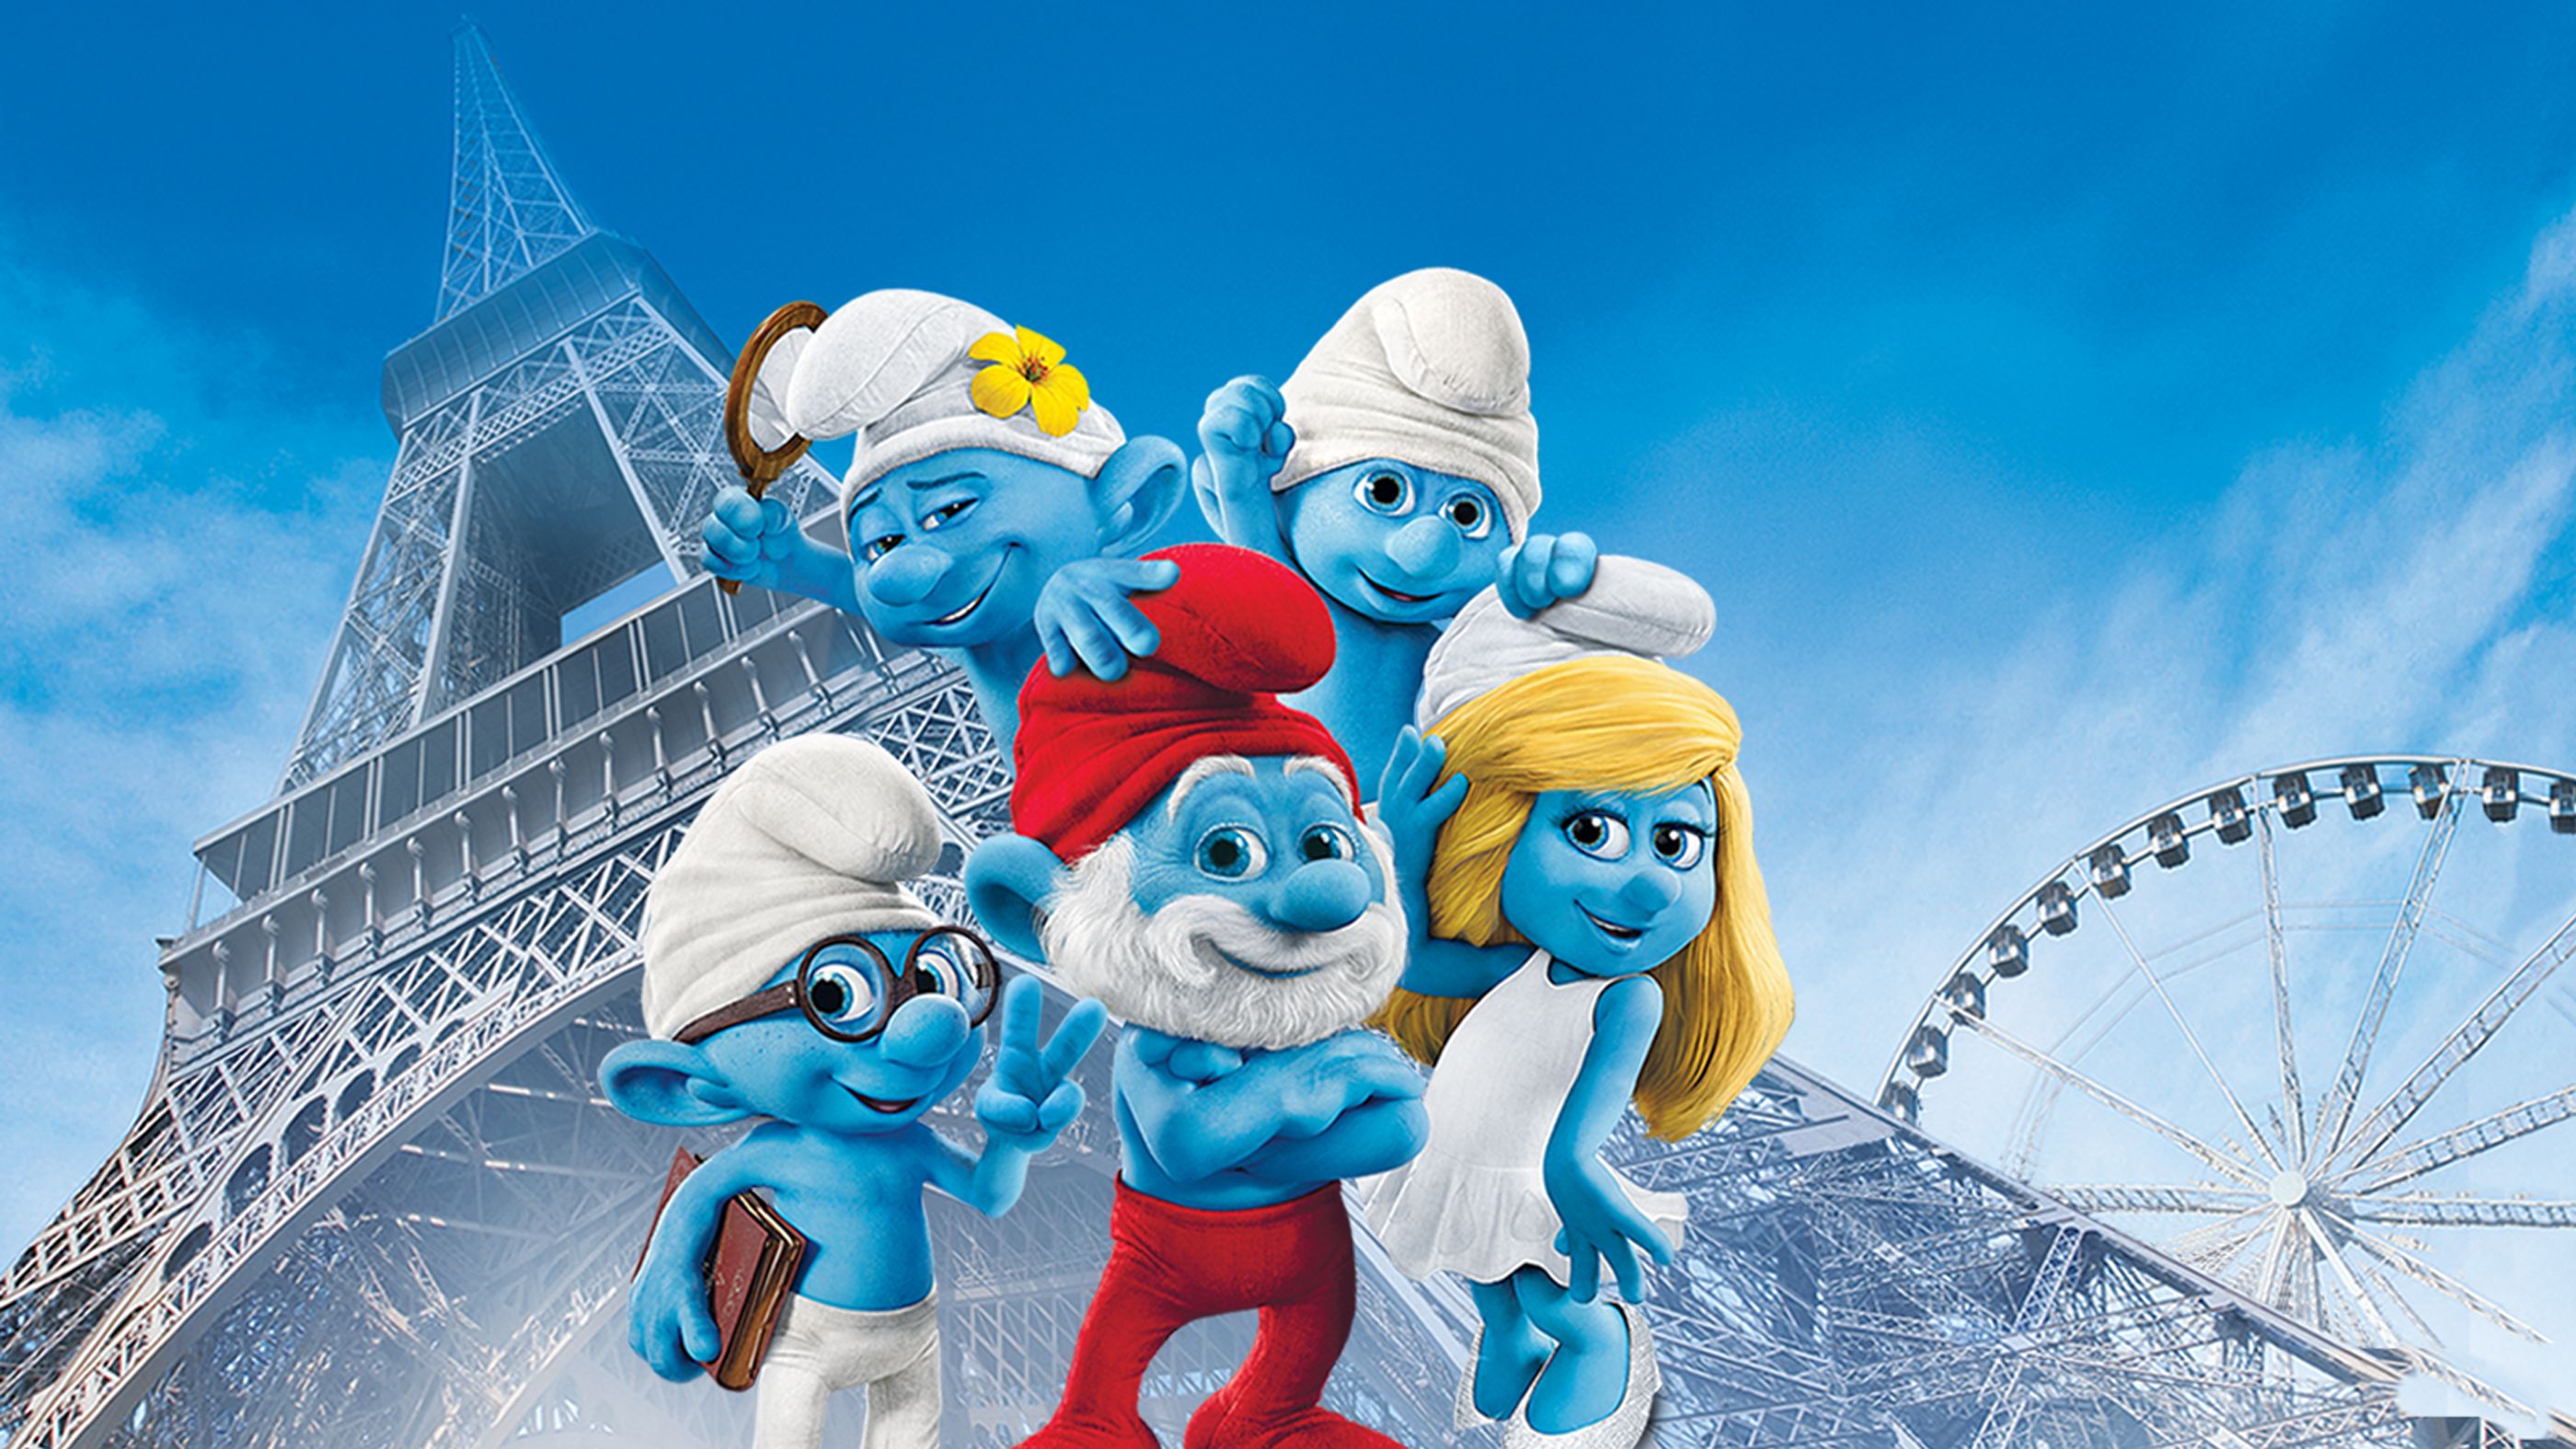 The Smurfs 2 Wallpapers